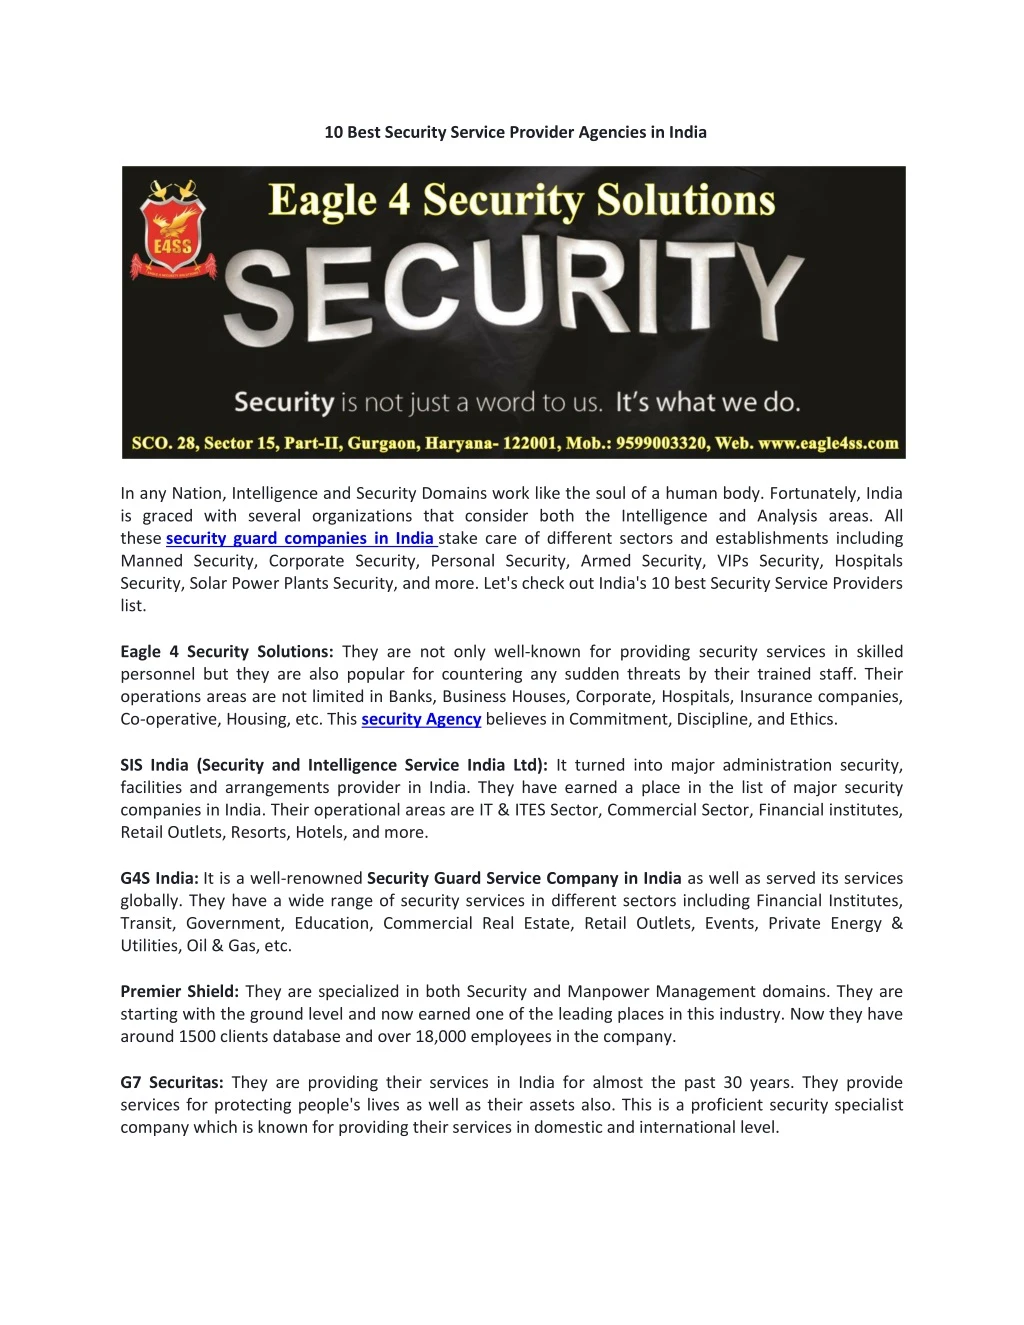 10 best security service provider agencies